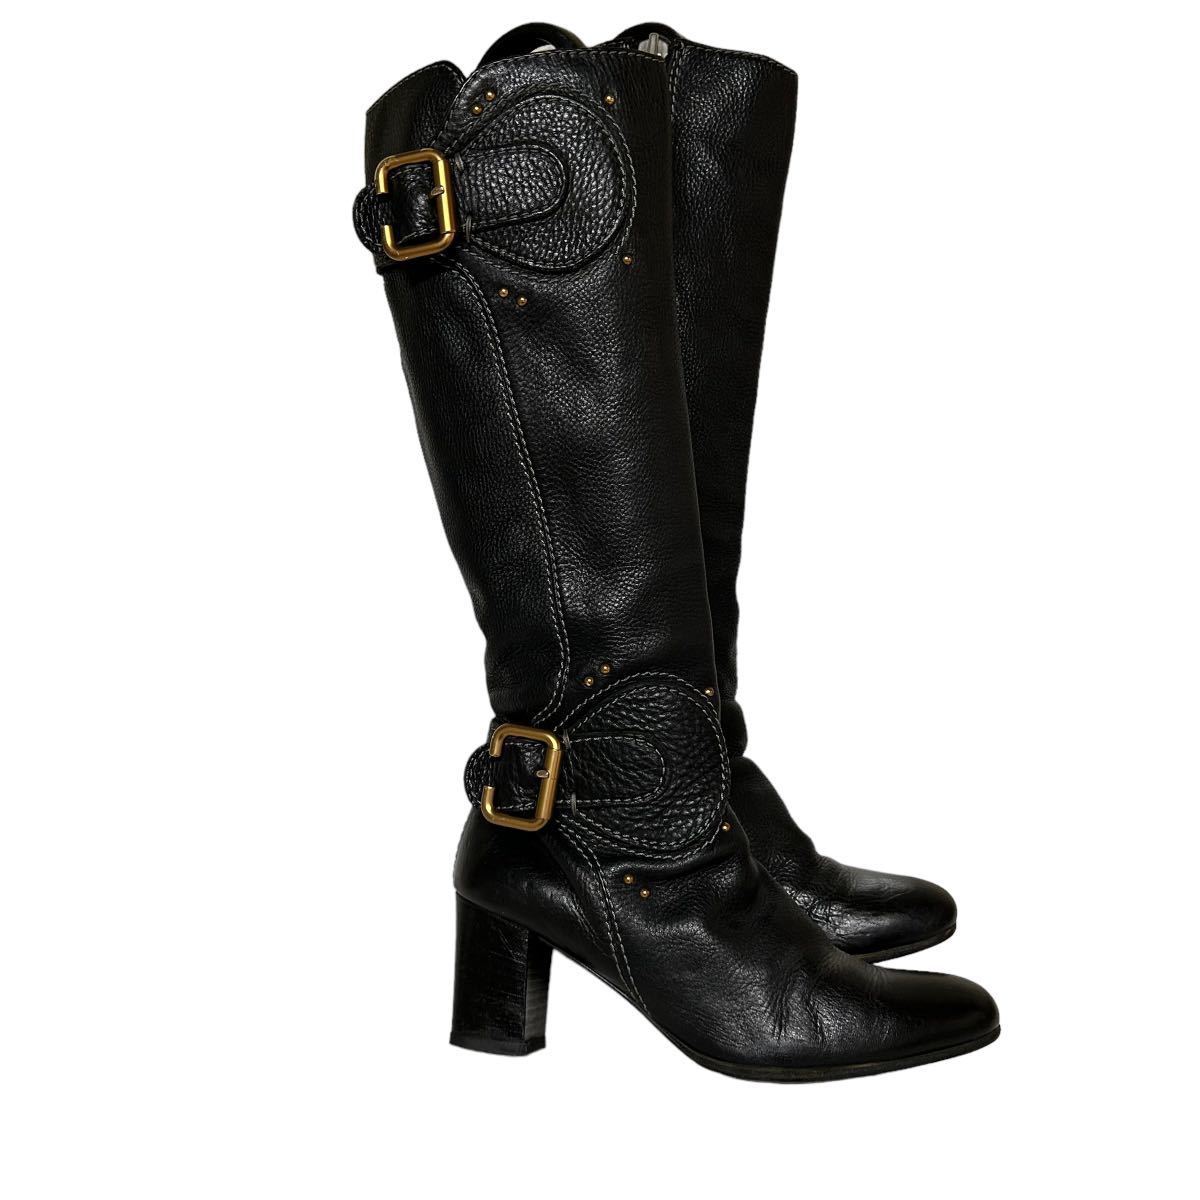 BA939 Italy made Chloe Chloe lady's long boots 38 approximately 24cm black leather original leather type pushed . side Zip 